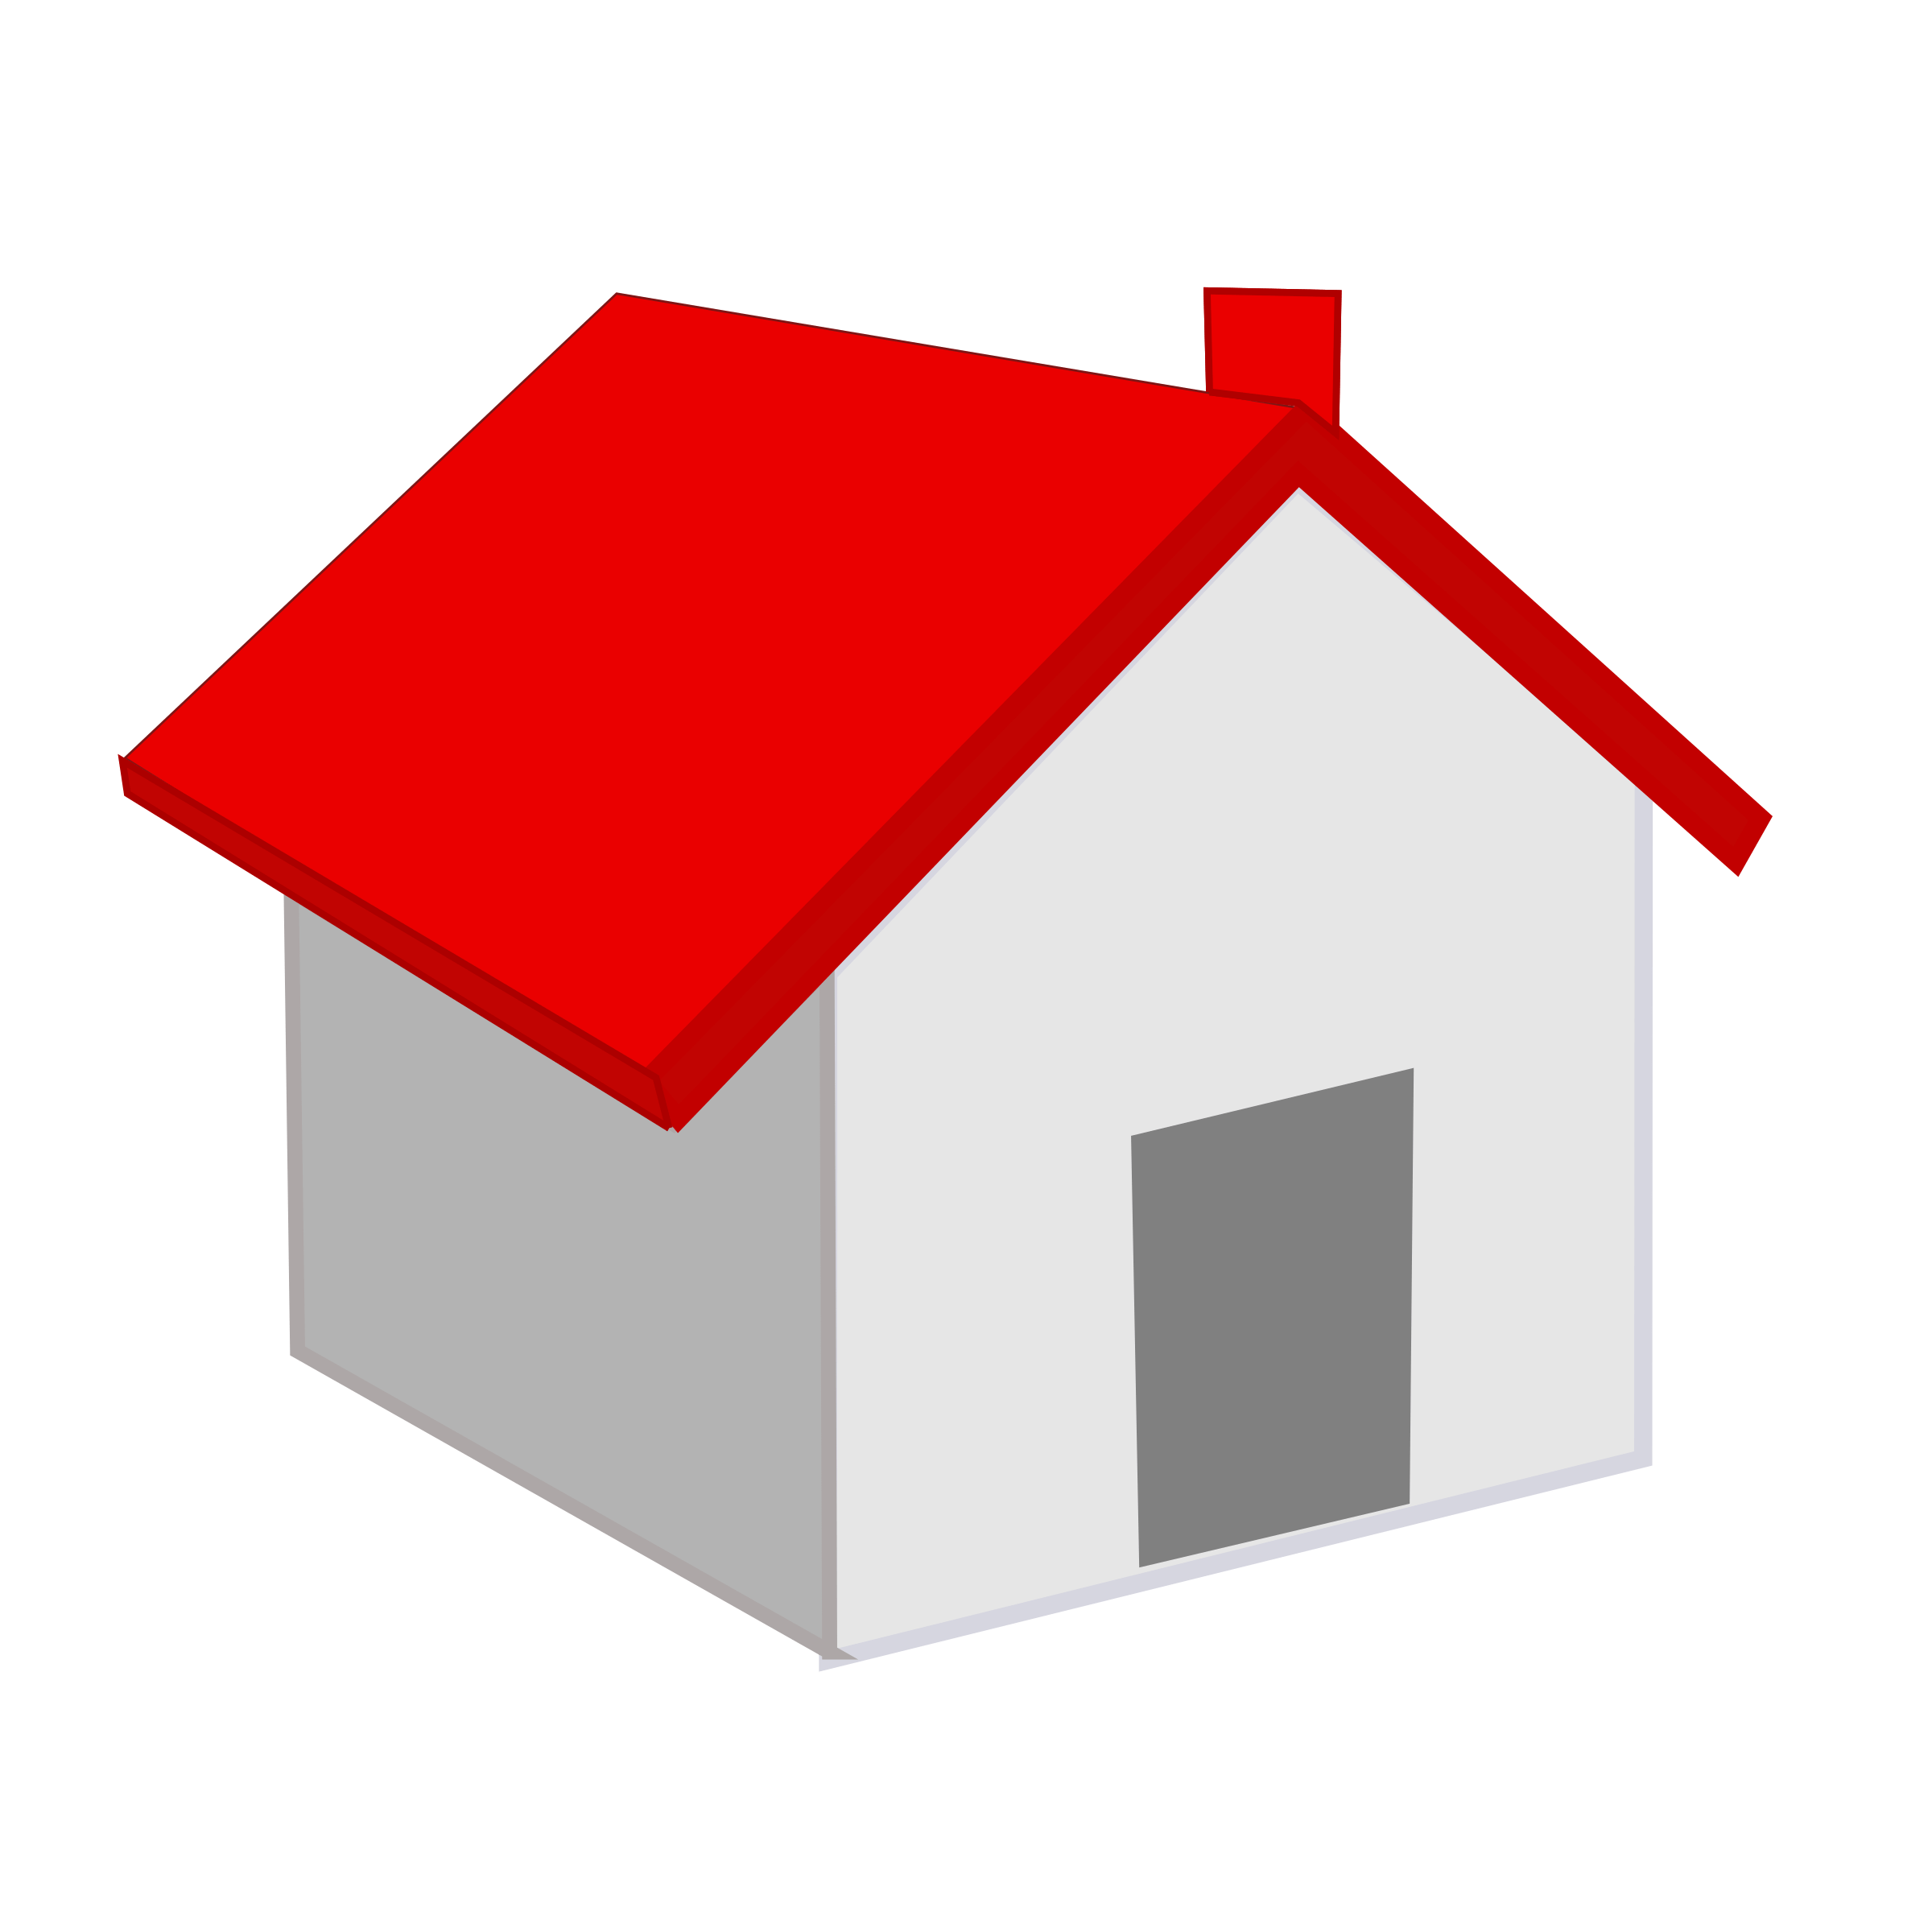 Red roof home icon. House graphic png